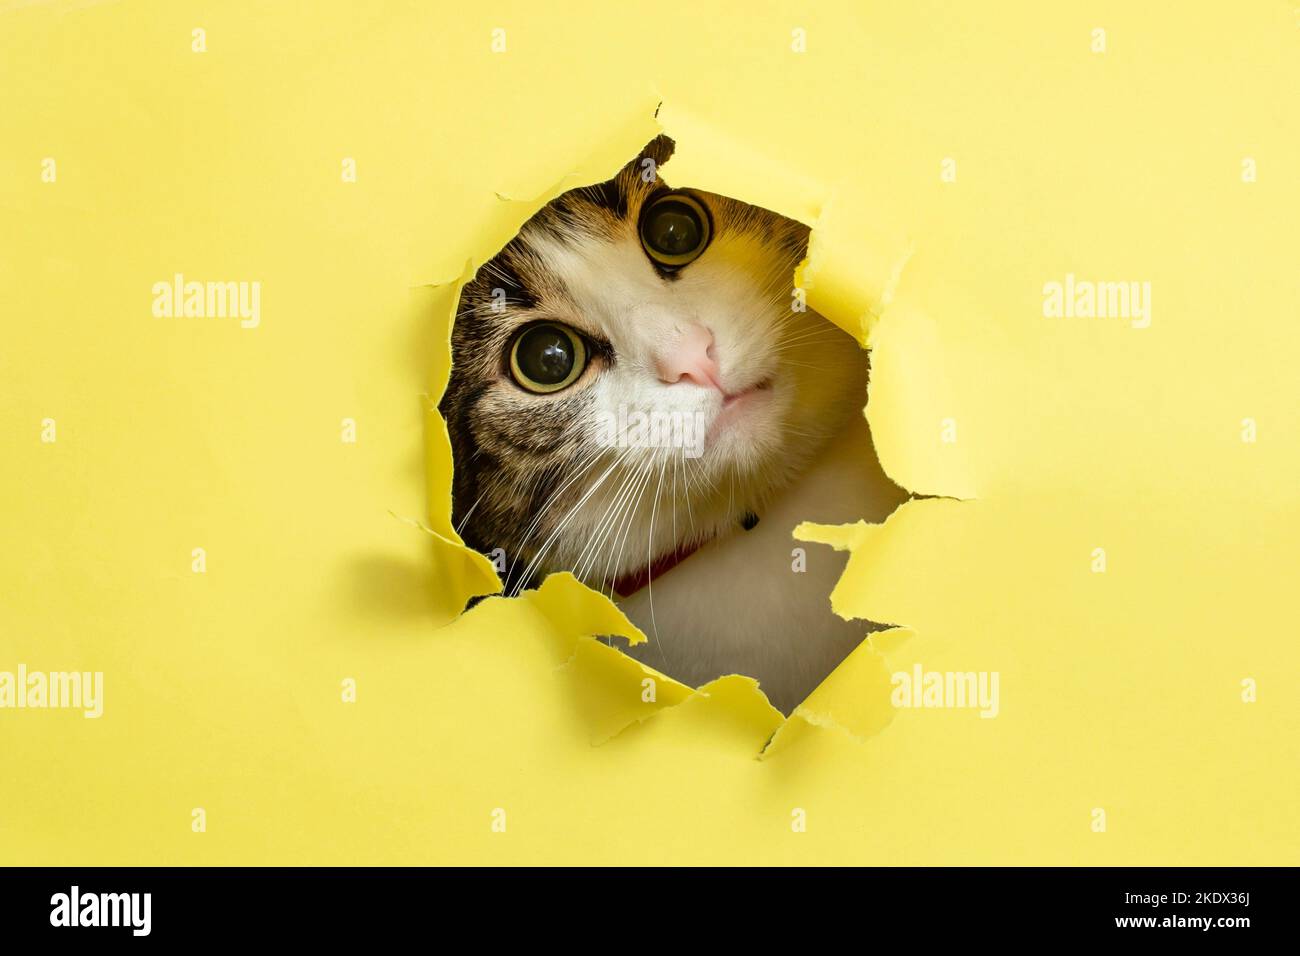 Cute cat with tilted head looking or peaking thru a ripped hole in yellow cardboard Stock Photo